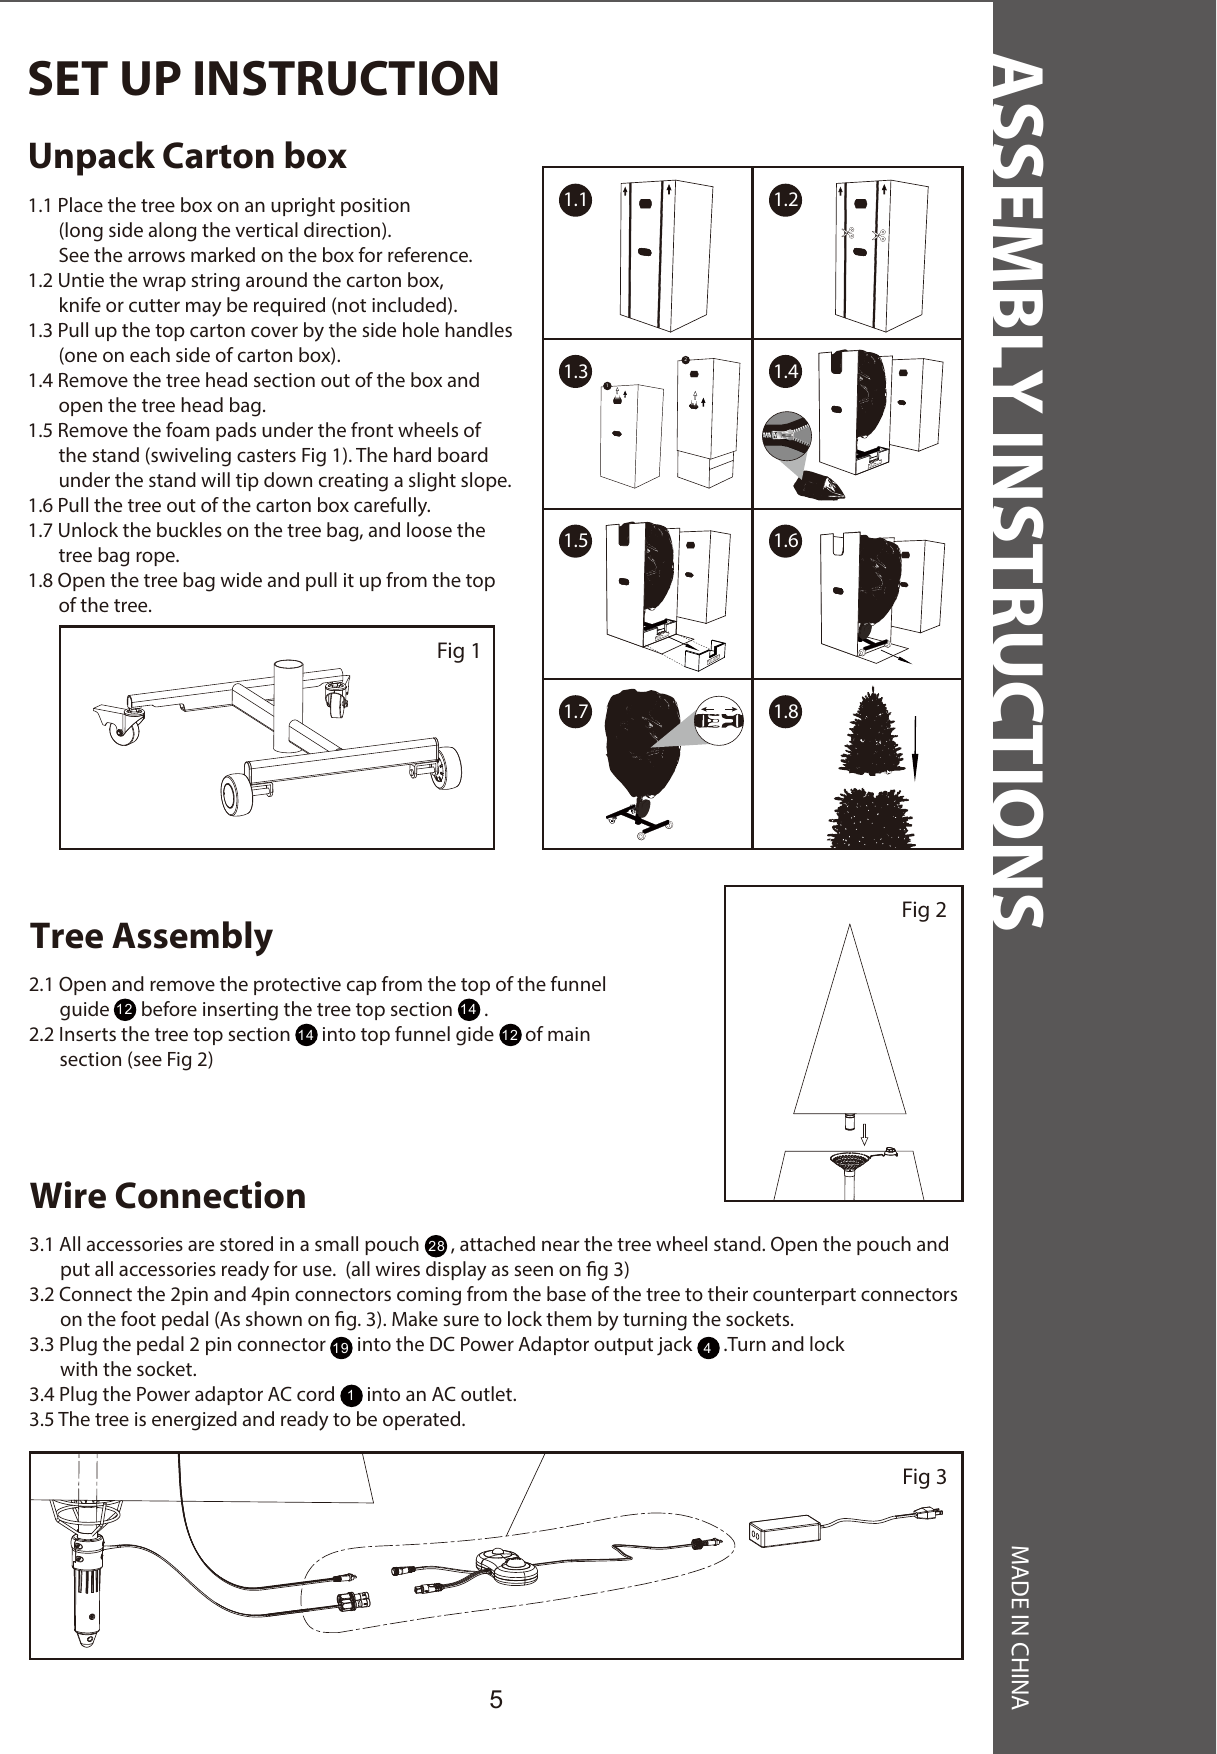 ASSEMBLY INSTRUCTIONS MADE IN CHINA5Unpack Carton box Tree Assembly1.1 Place the tree box on an upright position       (long side along the vertical direction).        See the arrows marked on the box for reference. 1.2 Untie the wrap string around the carton box,        knife or cutter may be required (not included).1.3 Pull up the top carton cover by the side hole handles        (one on each side of carton box).1.4 Remove the tree head section out of the box and        open the tree head bag.1.5 Remove the foam pads under the front wheels of       the stand (swiveling casters Fig 1). The hard board        under the stand will tip down creating a slight slope.1.6 Pull the tree out of the carton box carefully.1.7 Unlock the buckles on the tree bag, and loose the        tree bag rope.1.8 Open the tree bag wide and pull it up from the top        of the tree.2.1 Open and remove the protective cap from the top of the funnel        guide       before inserting the tree top section       .2.2 Inserts the tree top section       into top funnel gide       of main        section (see Fig 2)Wire ConnectionFig 312 1412143.1 All accessories are stored in a small pouch       , attached near the tree wheel stand. Open the pouch and        put all accessories ready for use.  (all wires display as seen on g 3)3.2 Connect the 2pin and 4pin connectors coming from the base of the tree to their counterpart connectors        on the foot pedal (As shown on g. 3). Make sure to lock them by turning the sockets.3.3 Plug the pedal 2 pin connector       into the DC Power Adaptor output jack       .Turn and lock        with the socket.3.4 Plug the Power adaptor AC cord       into an AC outlet. 3.5 The tree is energized and ready to be operated.19 4128SET UP INSTRUCTION1.1 1.21.3 1.41.5 1.61.7 1.8PULL HEREPULL HEREPULL HEREFig 1Fig 212